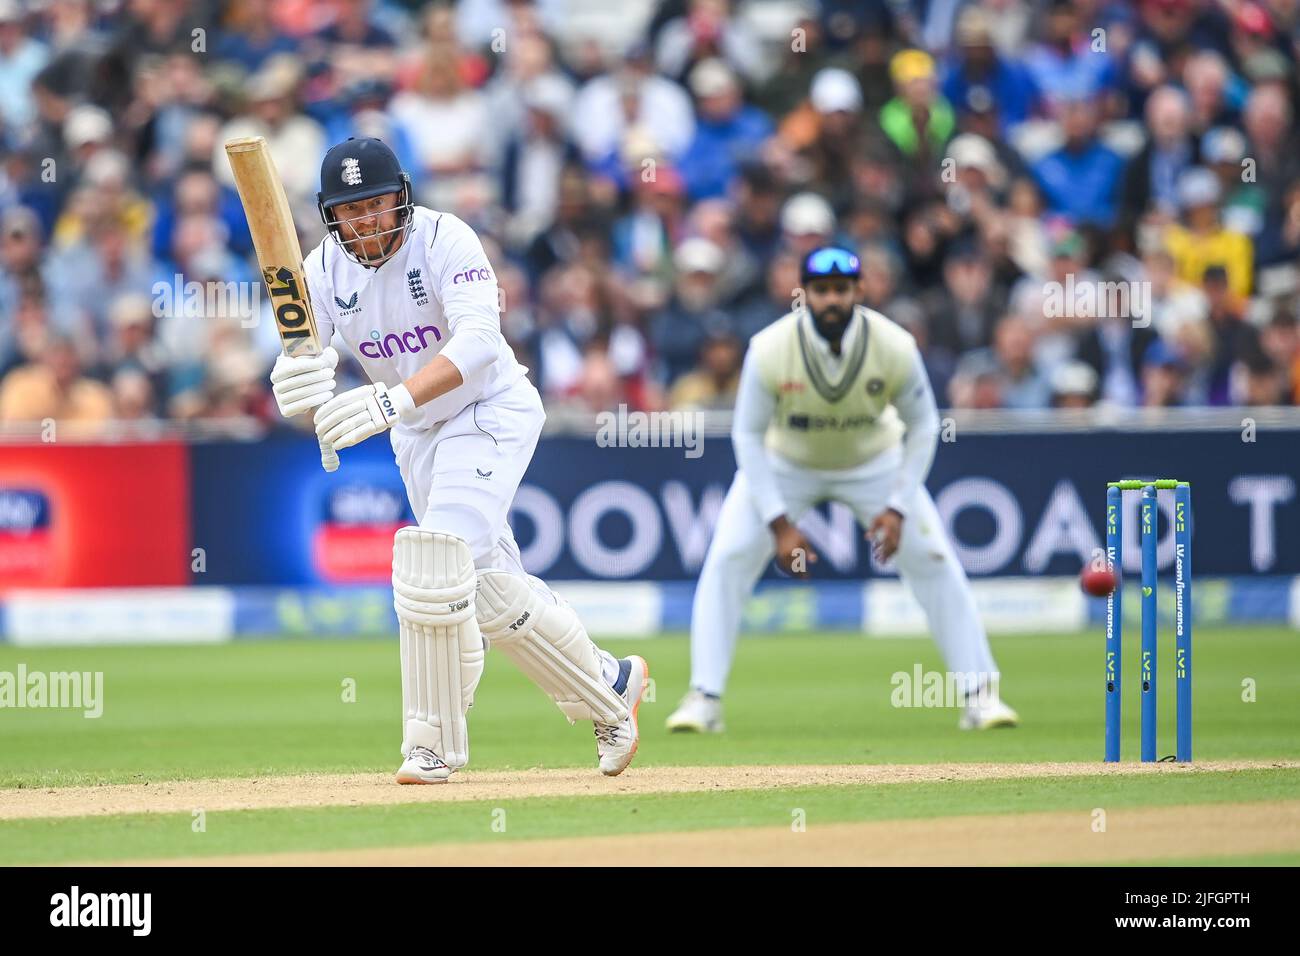 Jonny Bairstow of England clips the first ball after the rain break for runs off the bowling of Shardul Thakur of India in ,  on 7/3/2022. (Photo by Craig Thomas/News Images/Sipa USA) Stock Photo